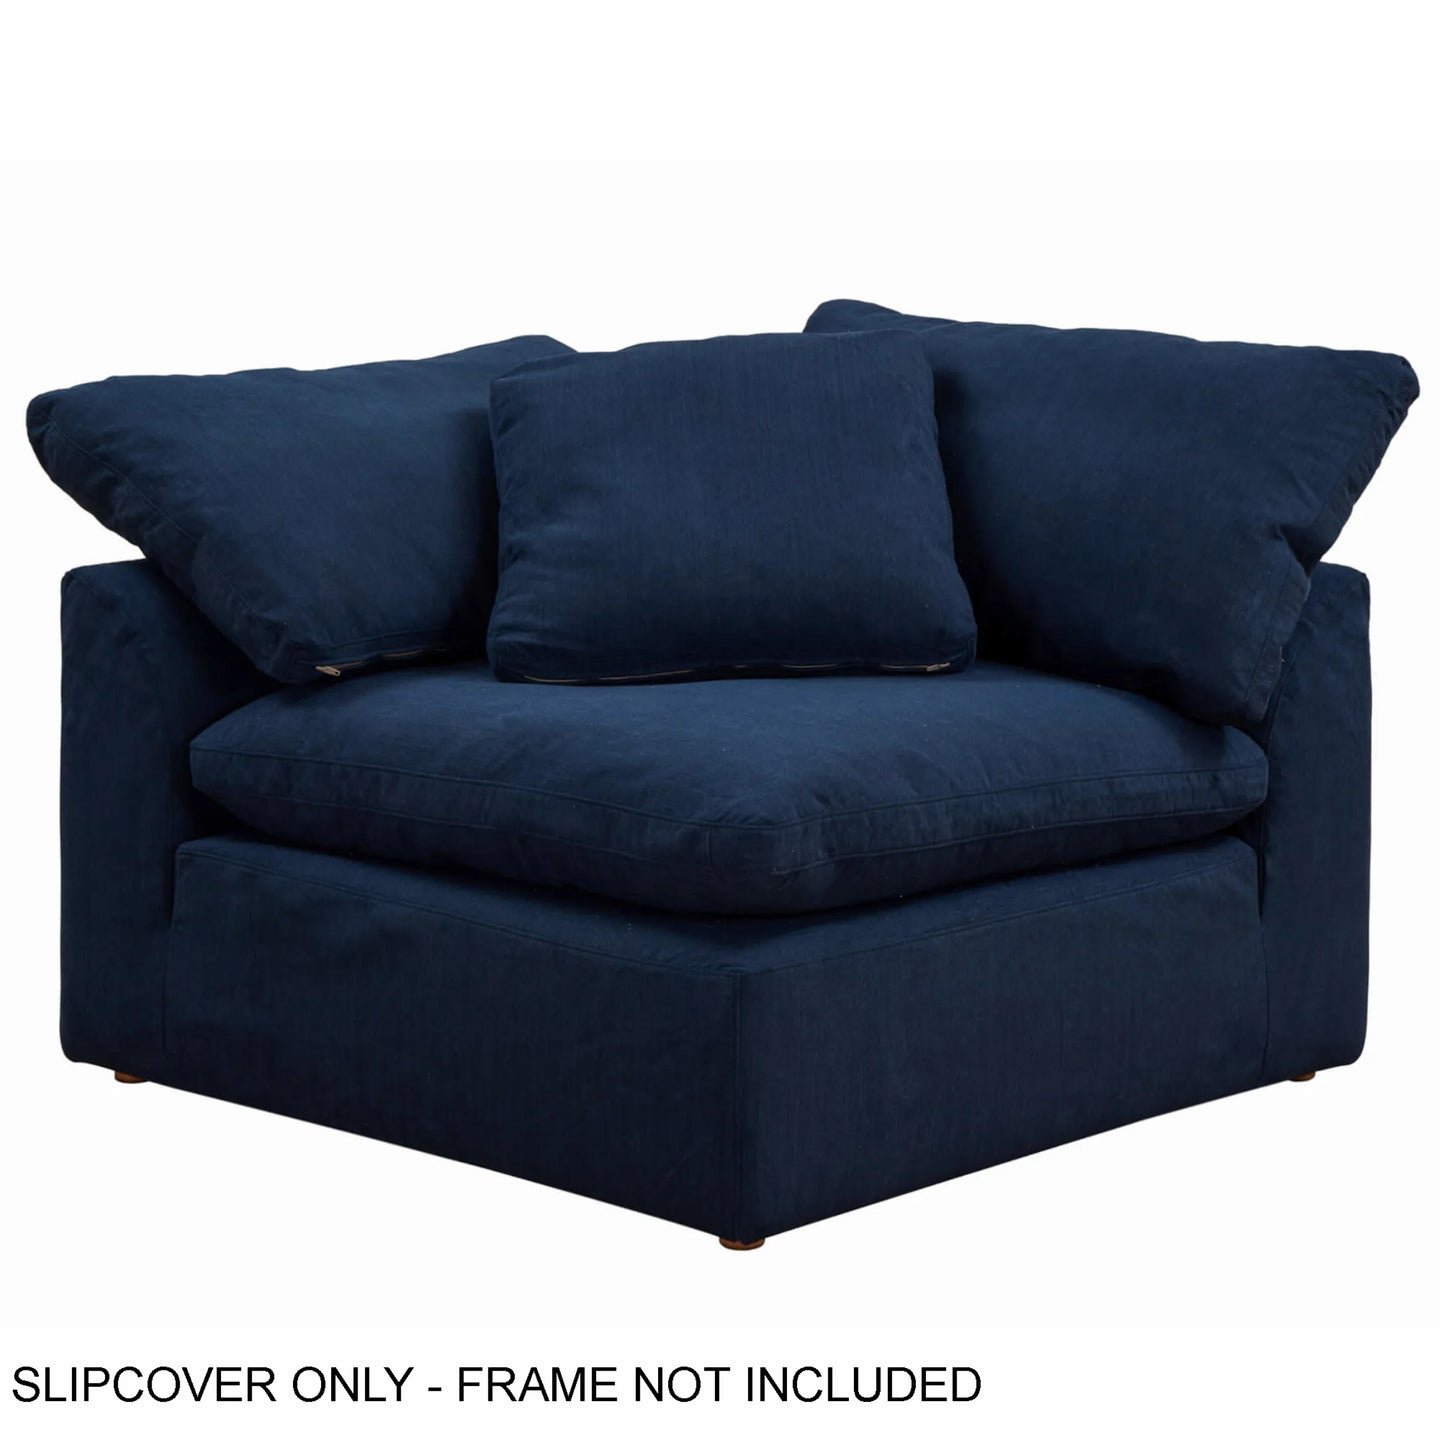 Sunset Trading Cloud Puff Slipcover for 2 Piece Modular Large Loveseat | Sectional Sofa Cover| Stain Resistant Performance Fabric | Navy Blue